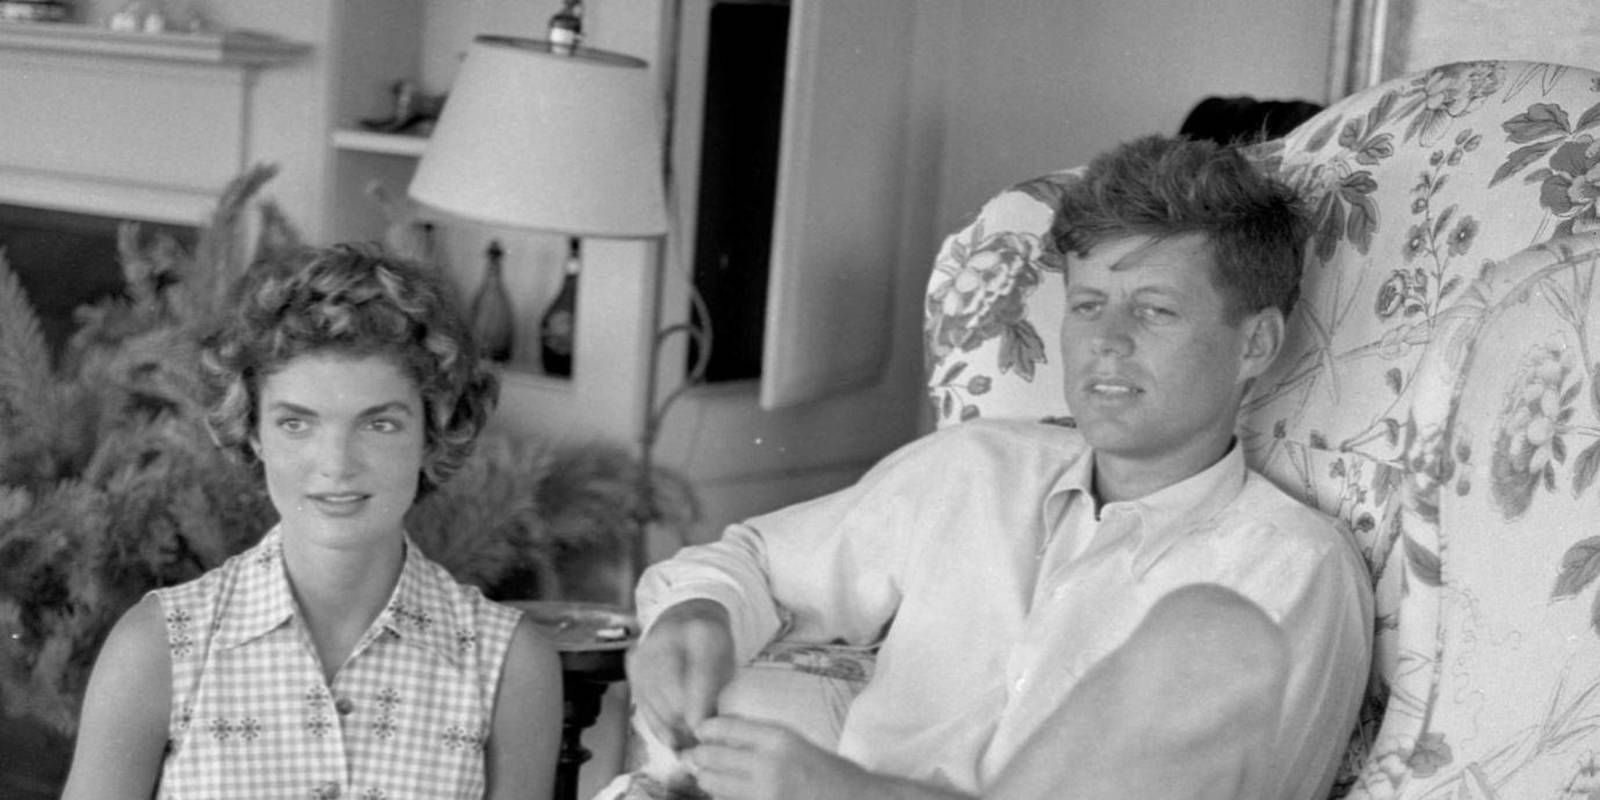 The Kennedy Family At Play Photos Of Private Family Moments